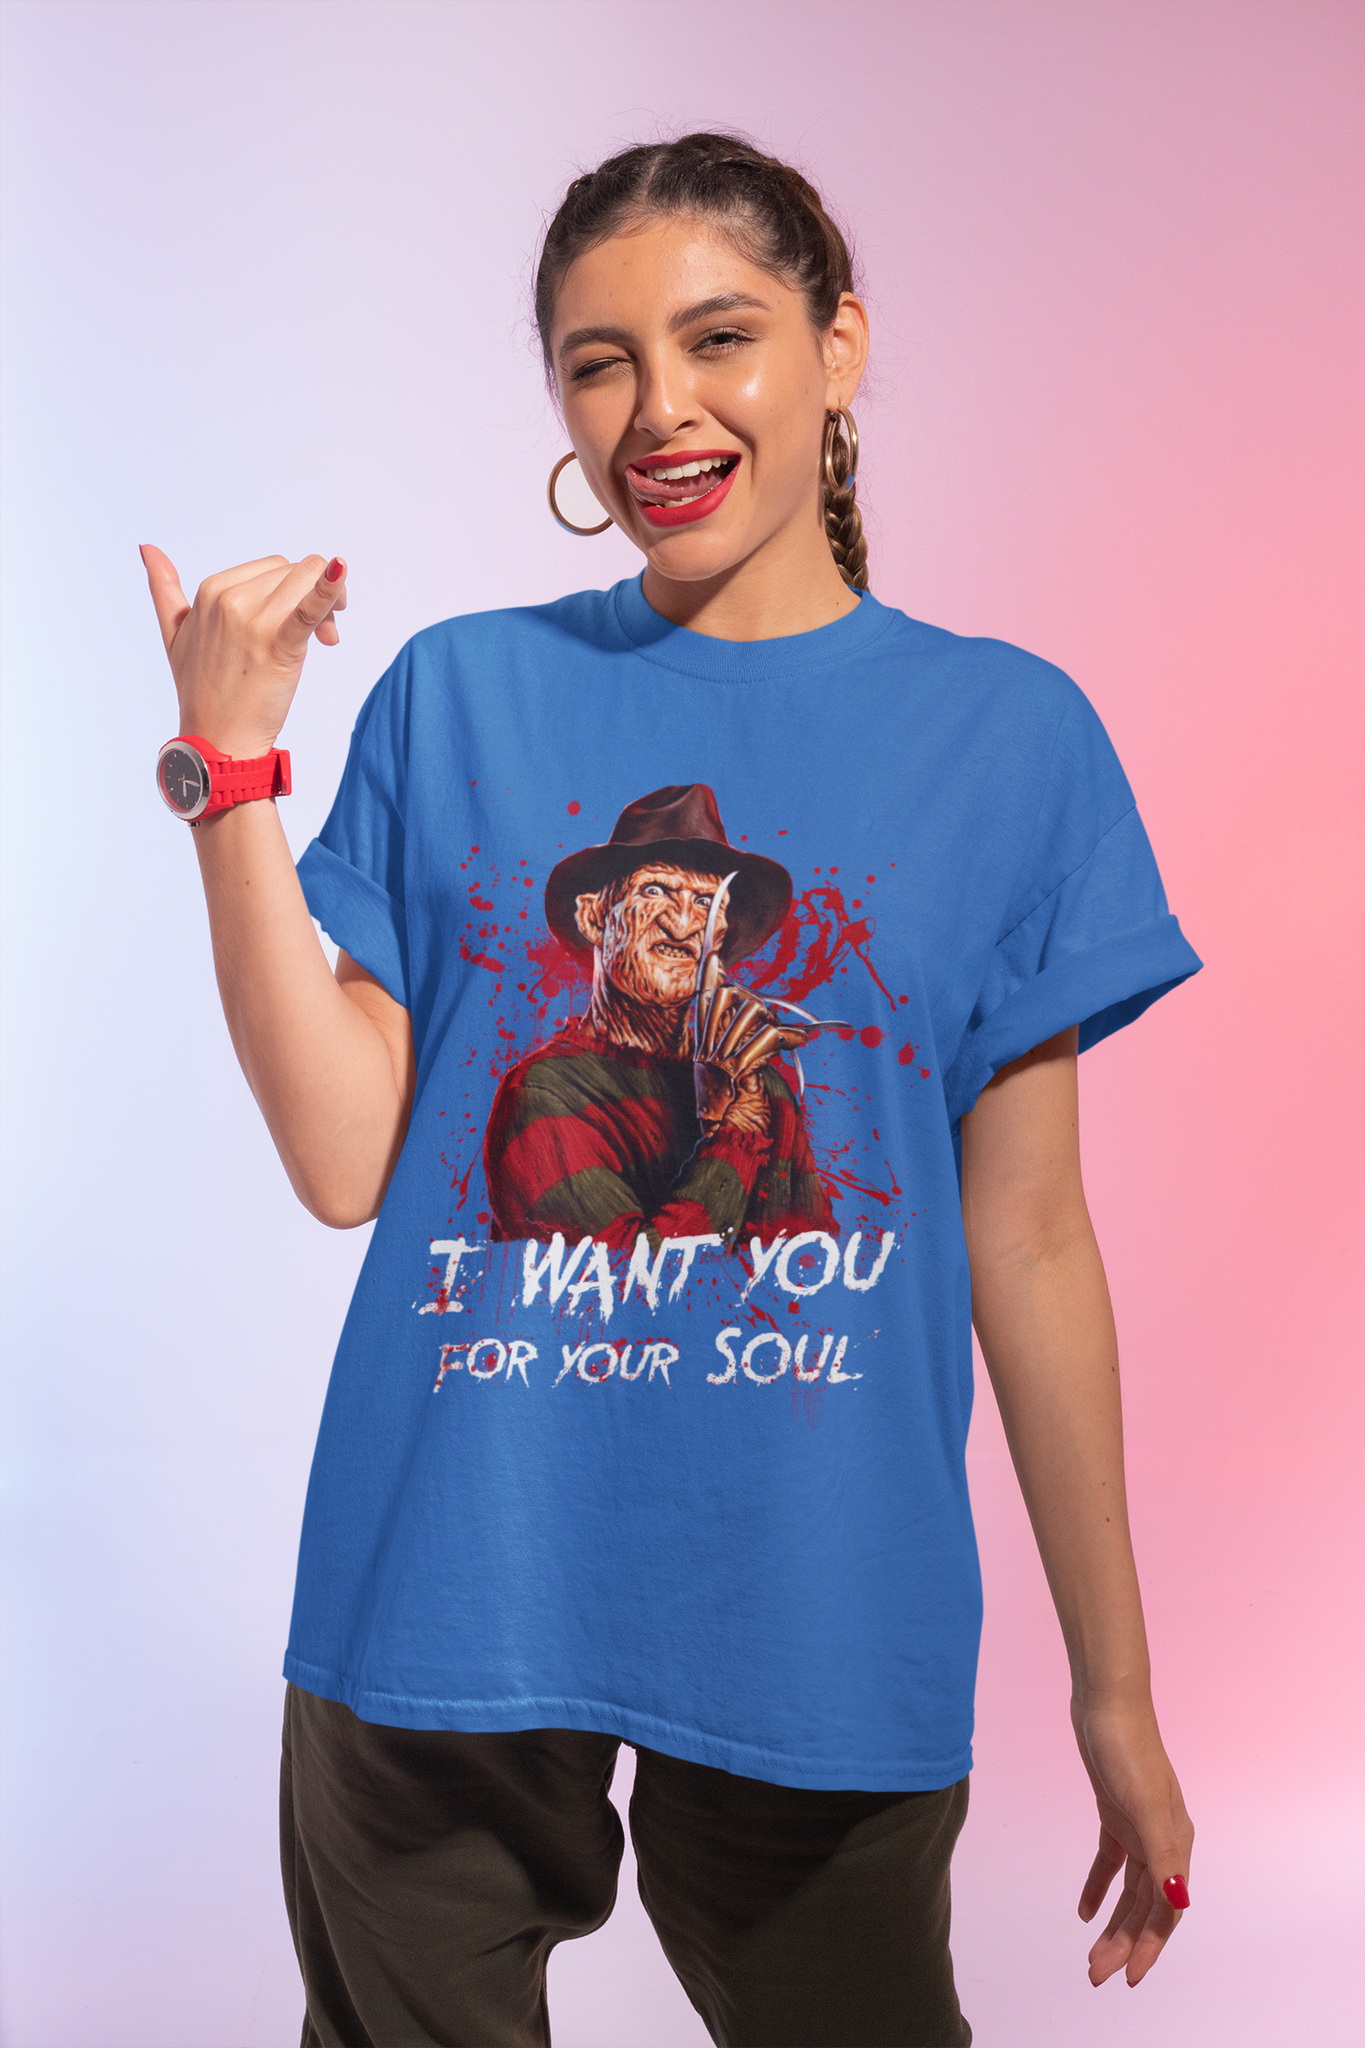 Nightmare On Elm Street T Shirt, I Want You For Your Soul Tshirt, Freddy Krueger T Shirt, Halloween Gifts